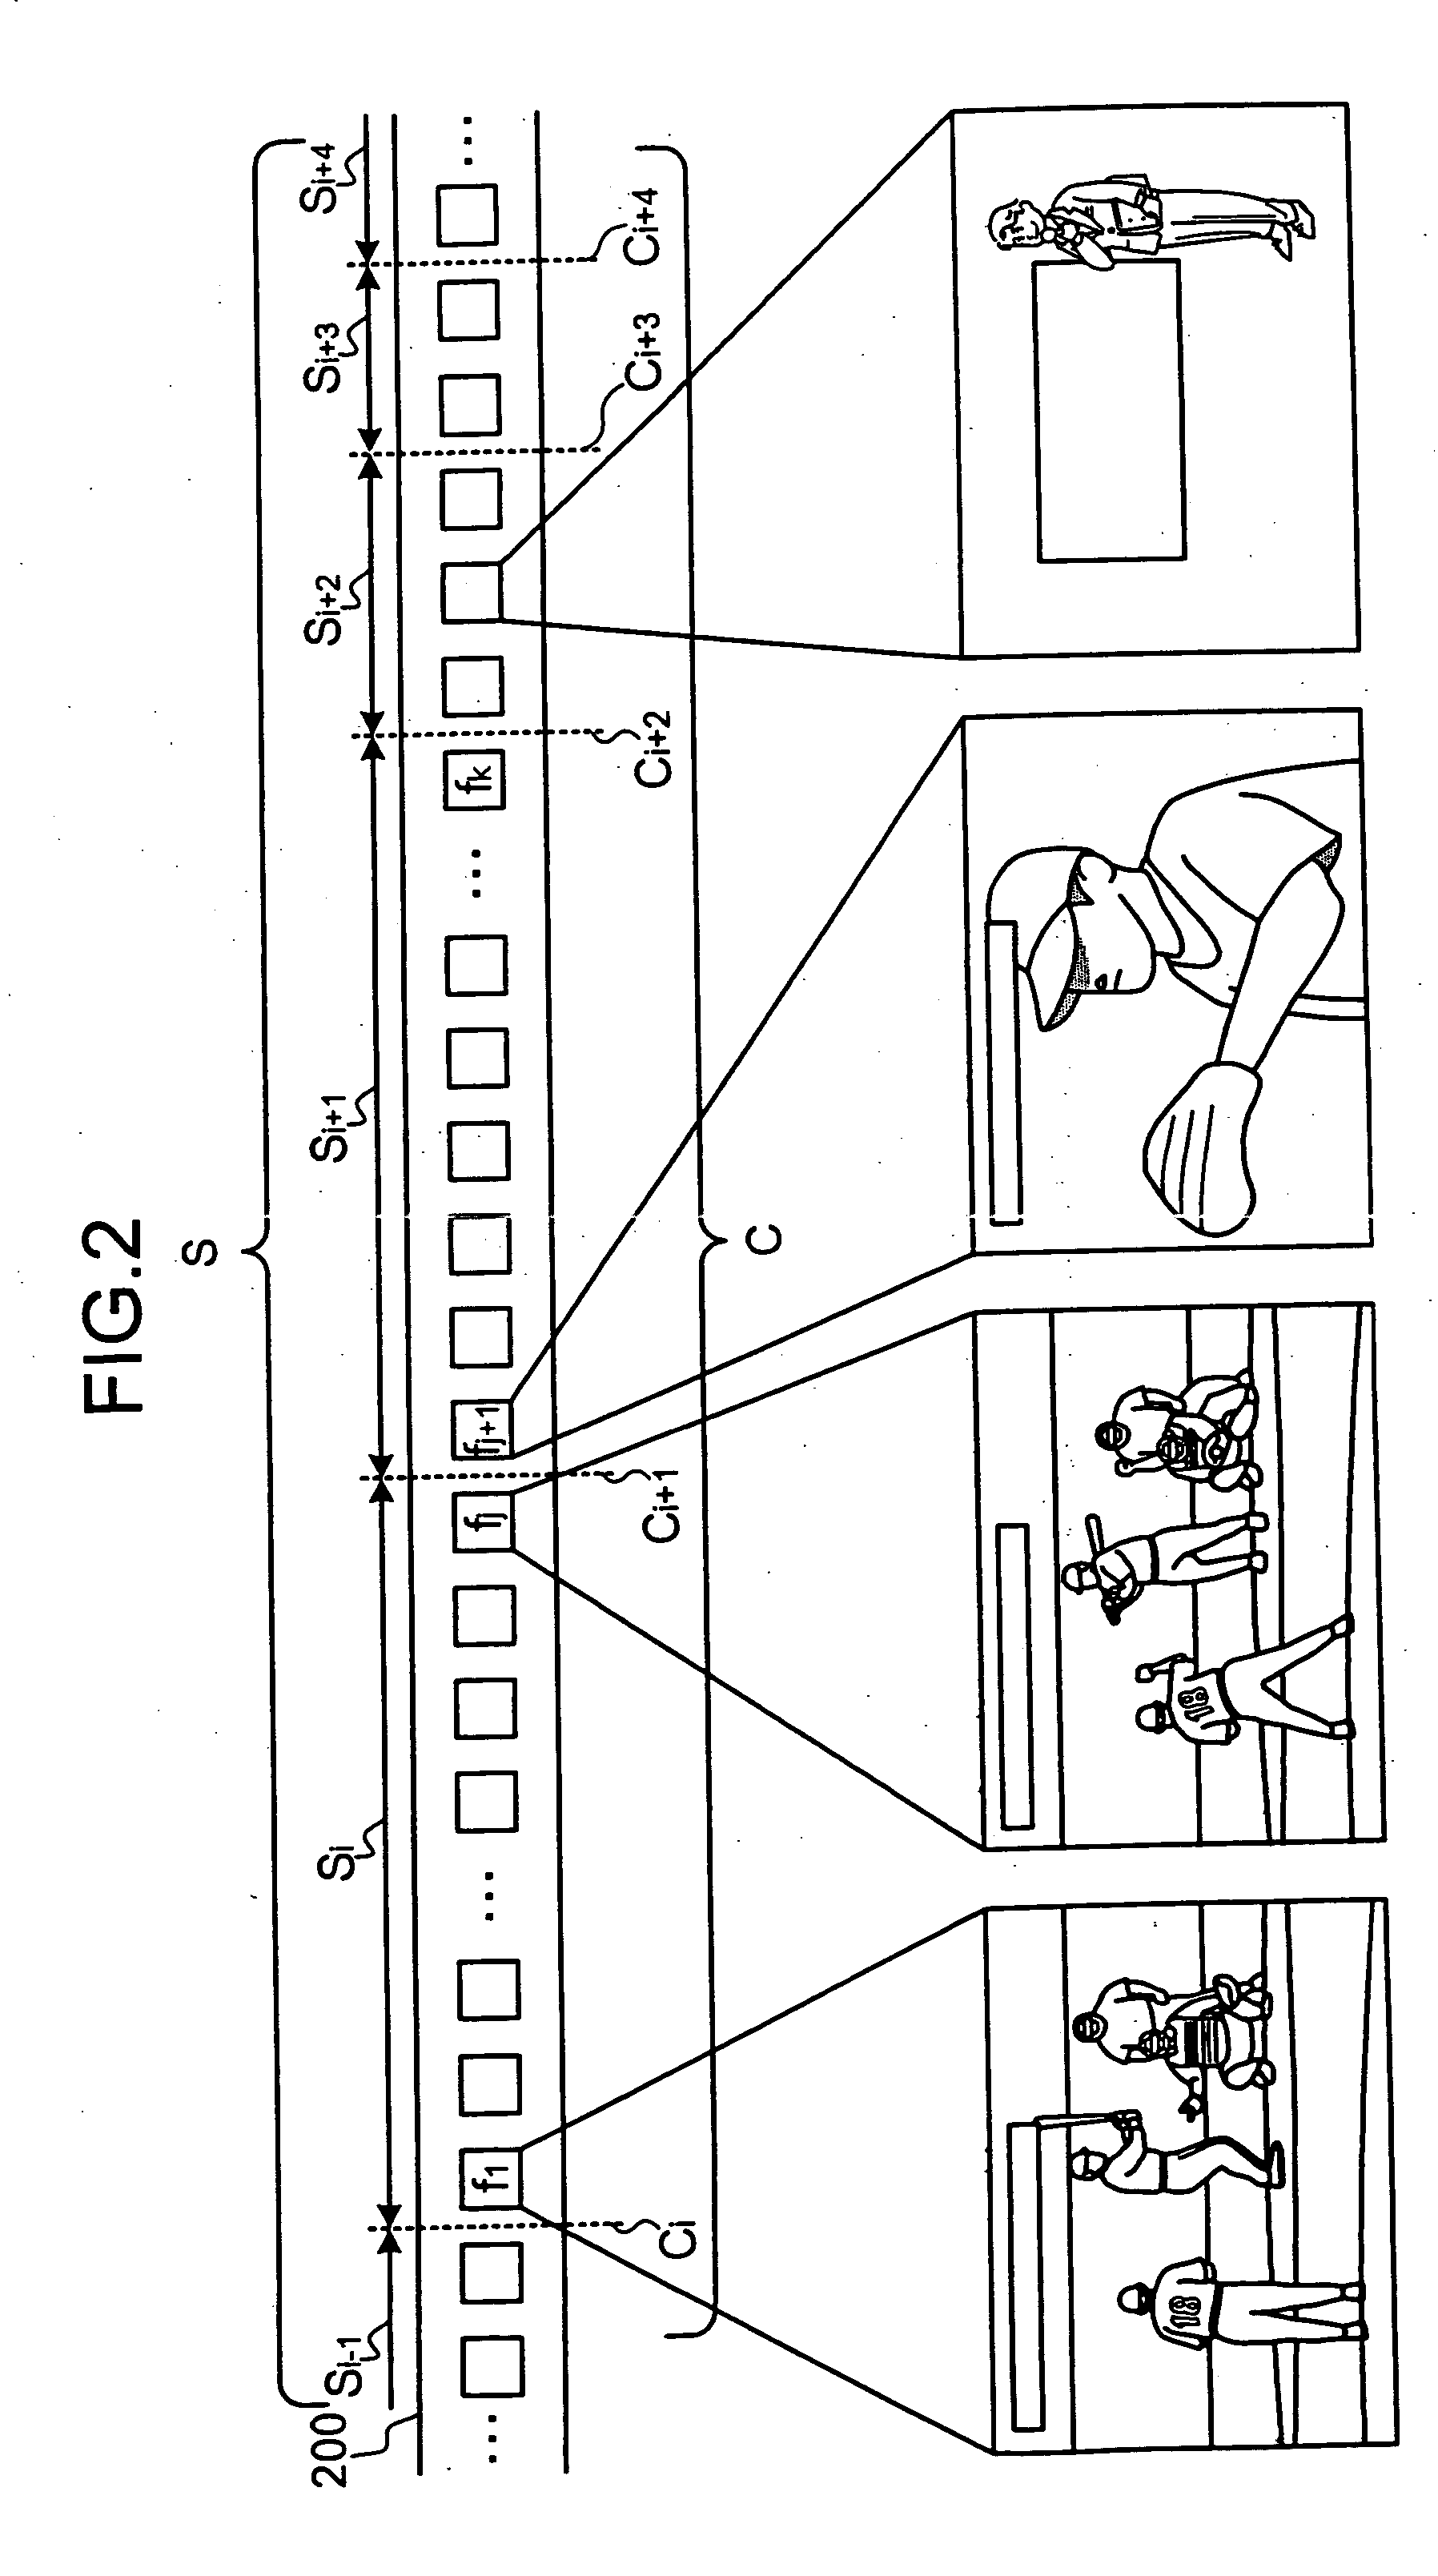 Apparatus, method, and computer product for recognizing video contents, and for video recording